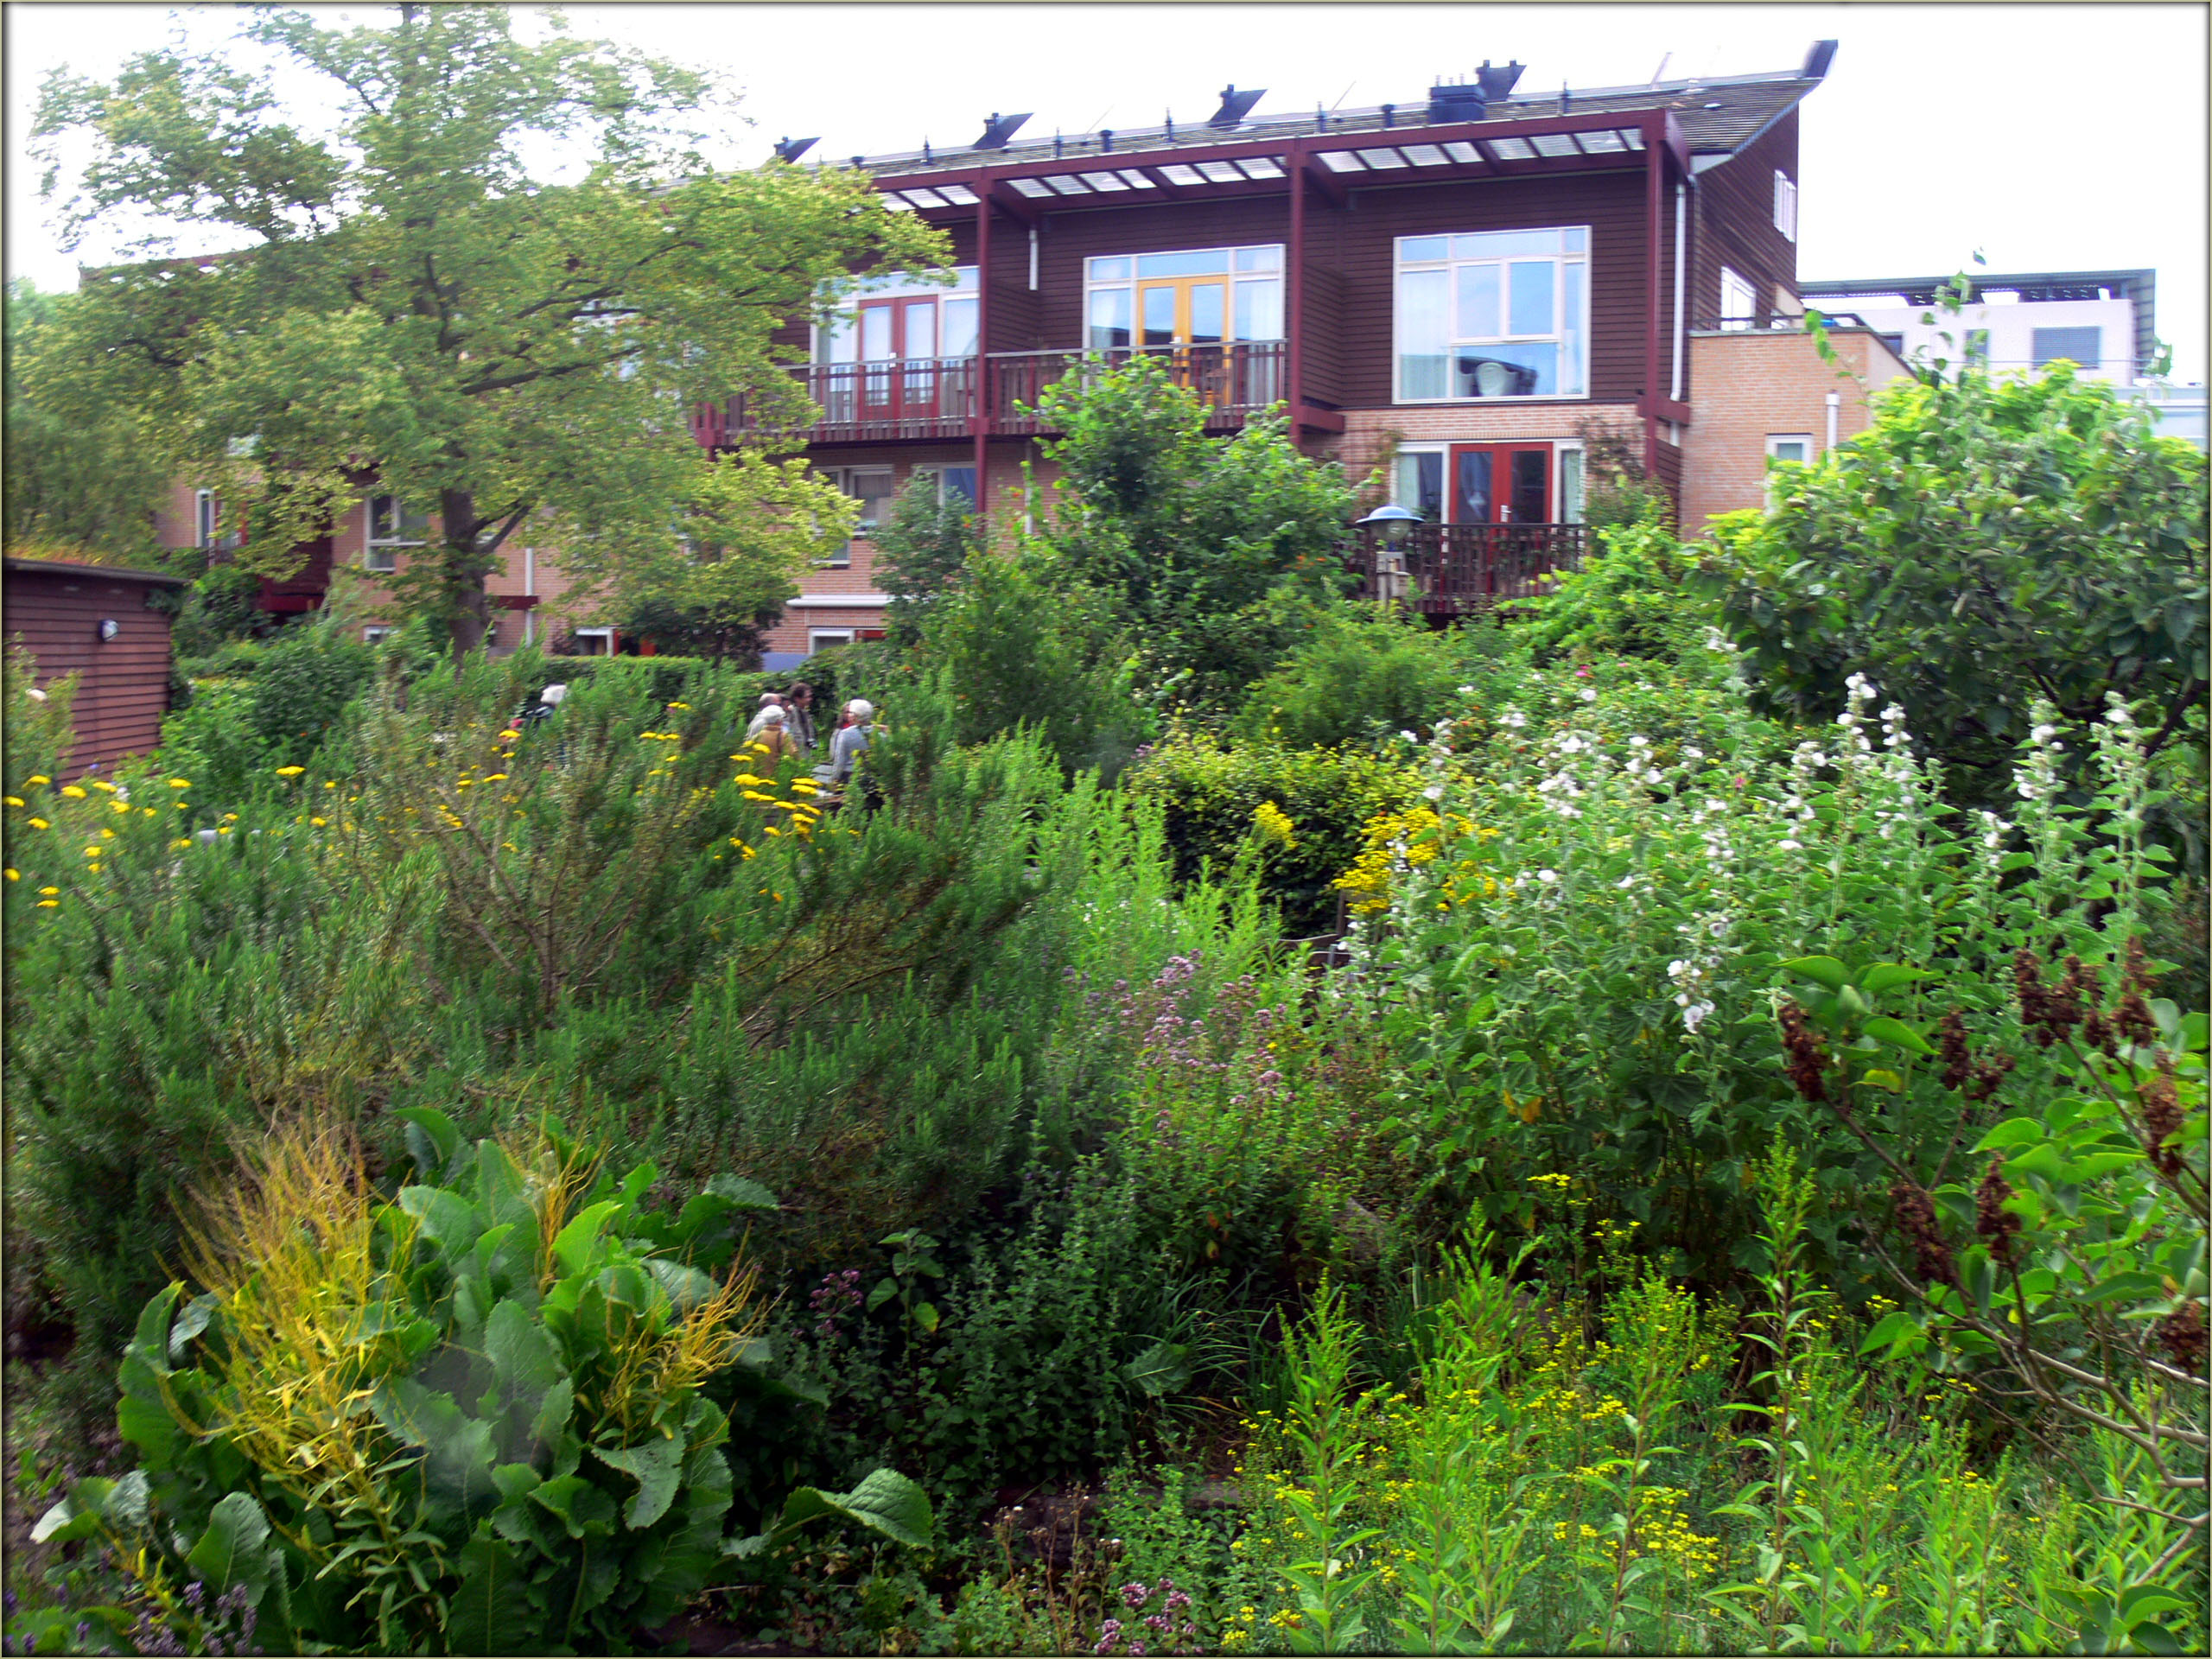 A lush permaculture garden backed by a line of row houses.